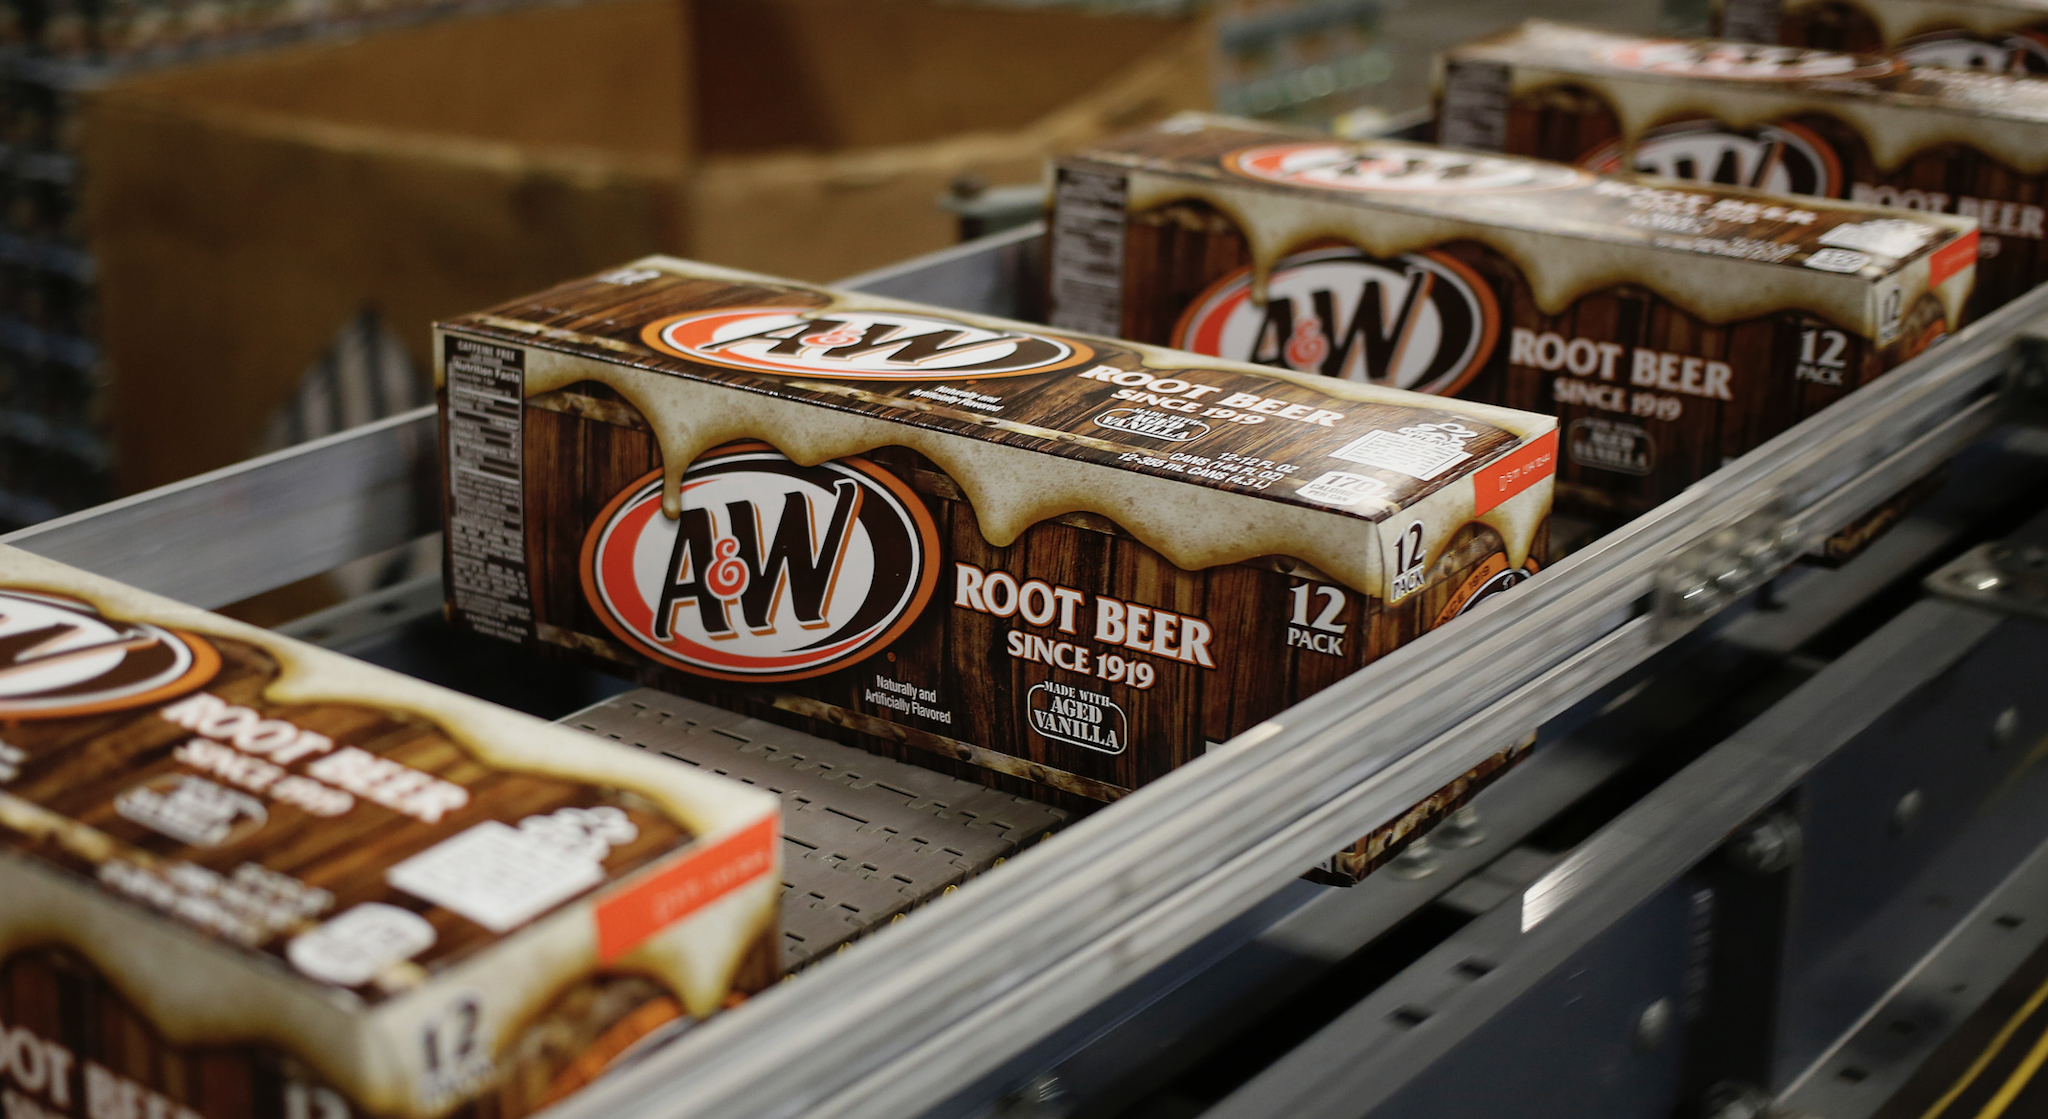 Cases of canned A&W Root Beer move down a conveyor belt after being filled at the Dr. Pepper Snapple Group Inc. bottling plant in Louisville, Kentucky, U.S., on Tuesday, April 21, 2015. Dr. Pepper Snapple Group Inc., producers of 7up and A&W Root Beer, is scheduled to release earnings figures on April 23.